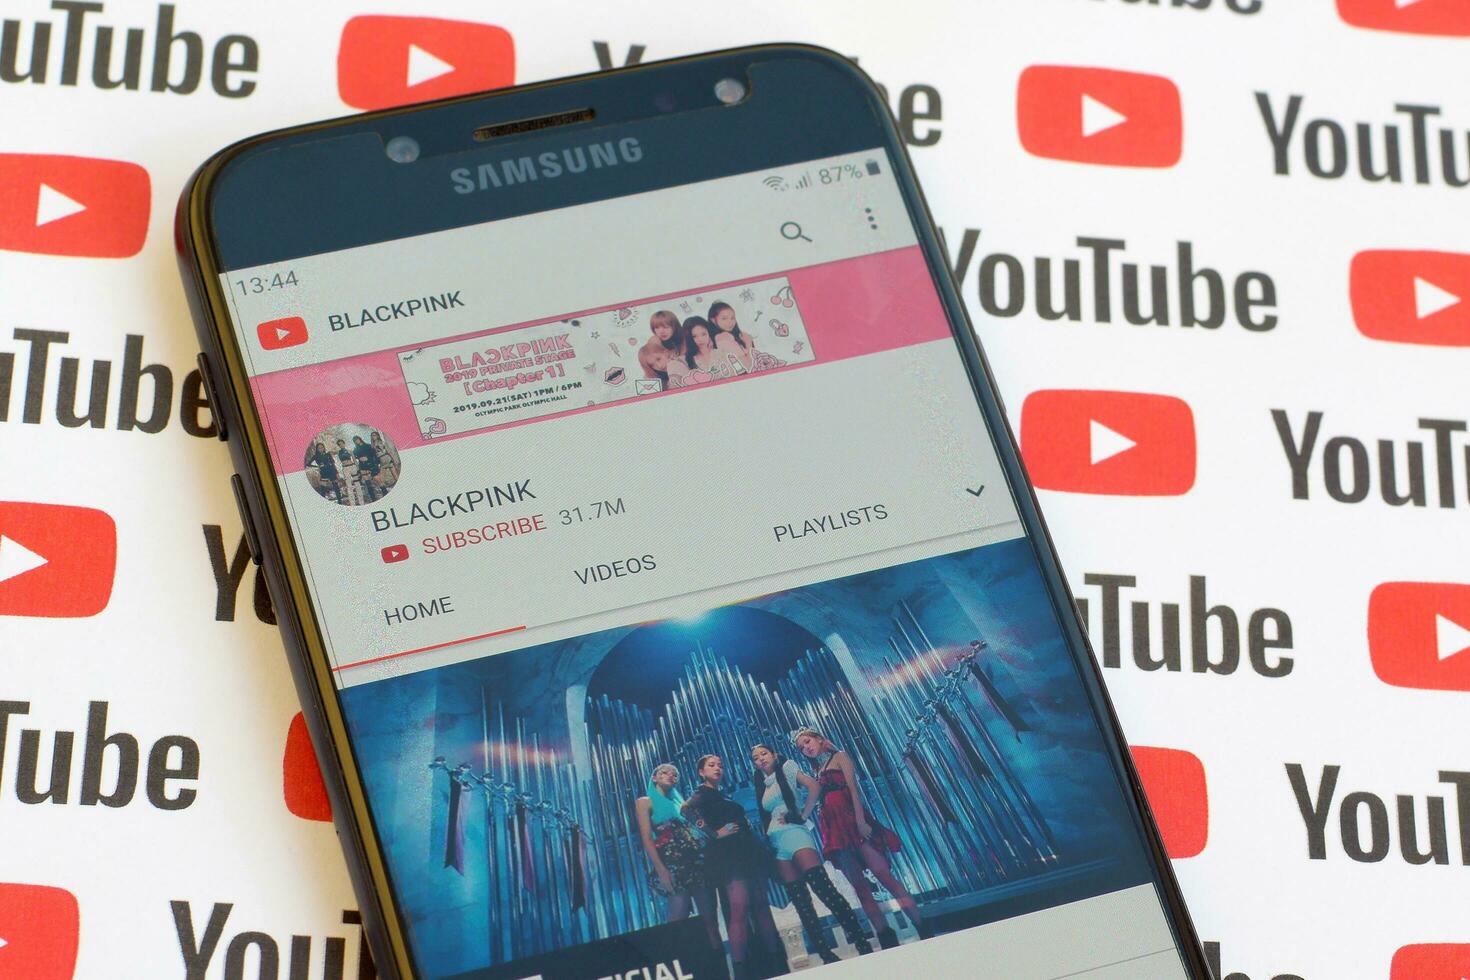 Blackpink official youtube channel on smartphone screen on paper youtube background. photo